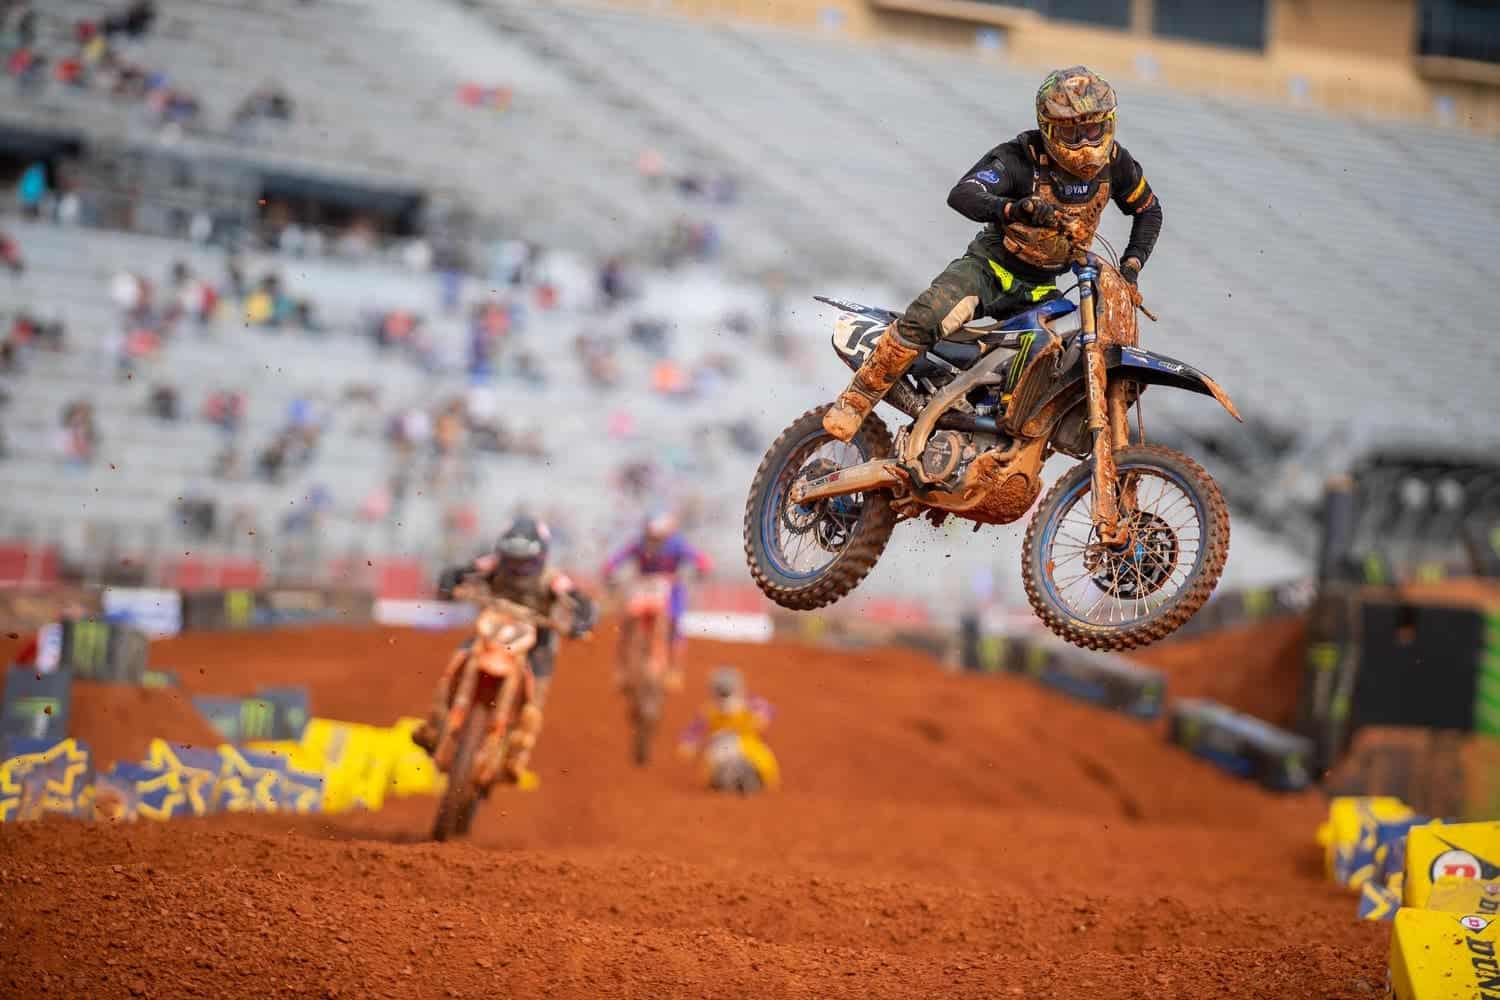 Dylan Ferrandis jumps through the whoops at Atlanta Motor Speedway. Photo by Align Media.